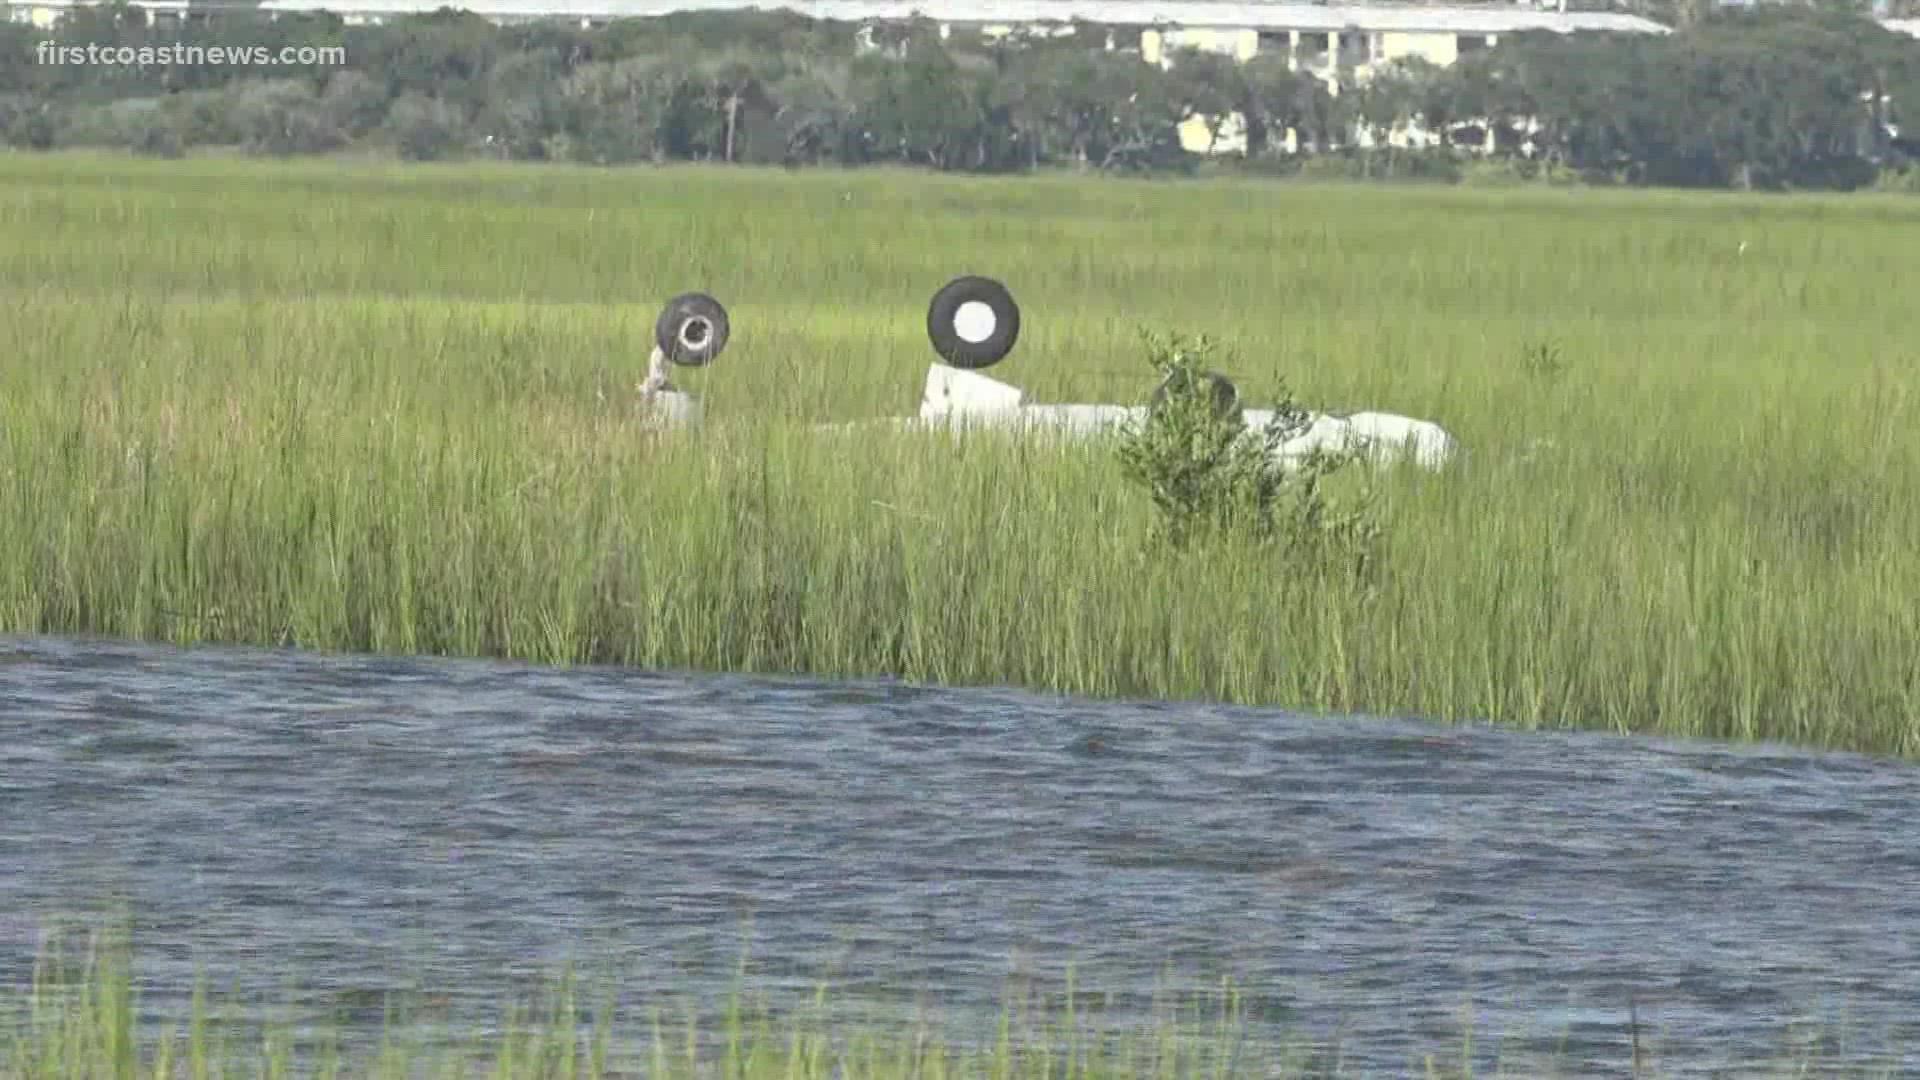 The plane flipped upside down in a marsh several yards away from the runaway. Investigators believe the plane was unable to gain altitude on the runway.